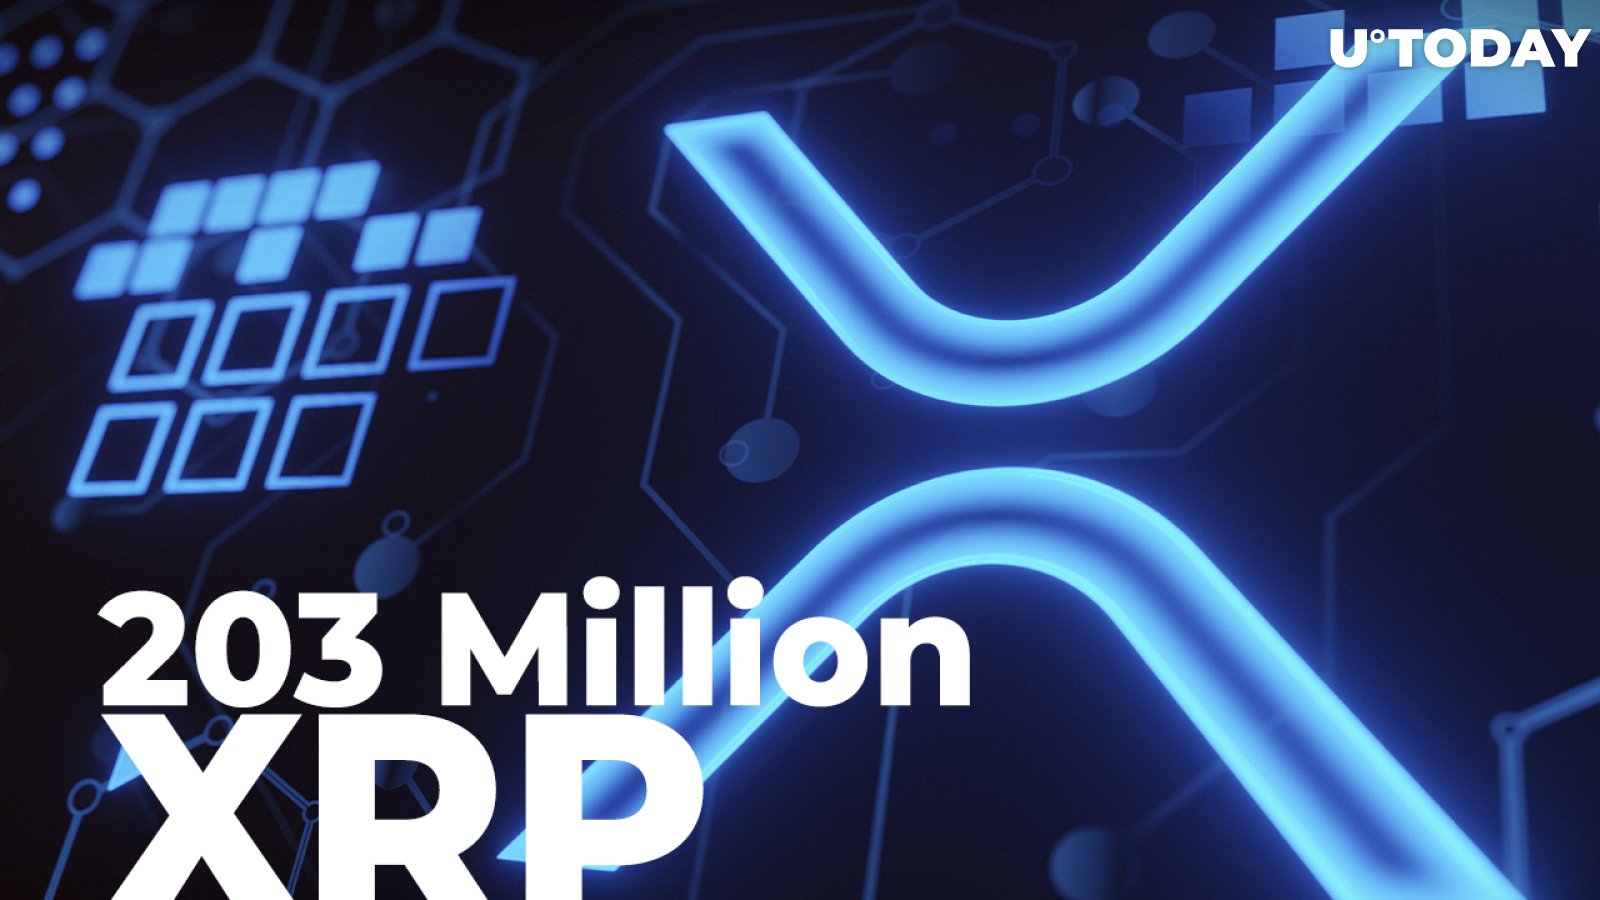 Ripple and Its ODL Exchanges Help Shift 203 Million XRP